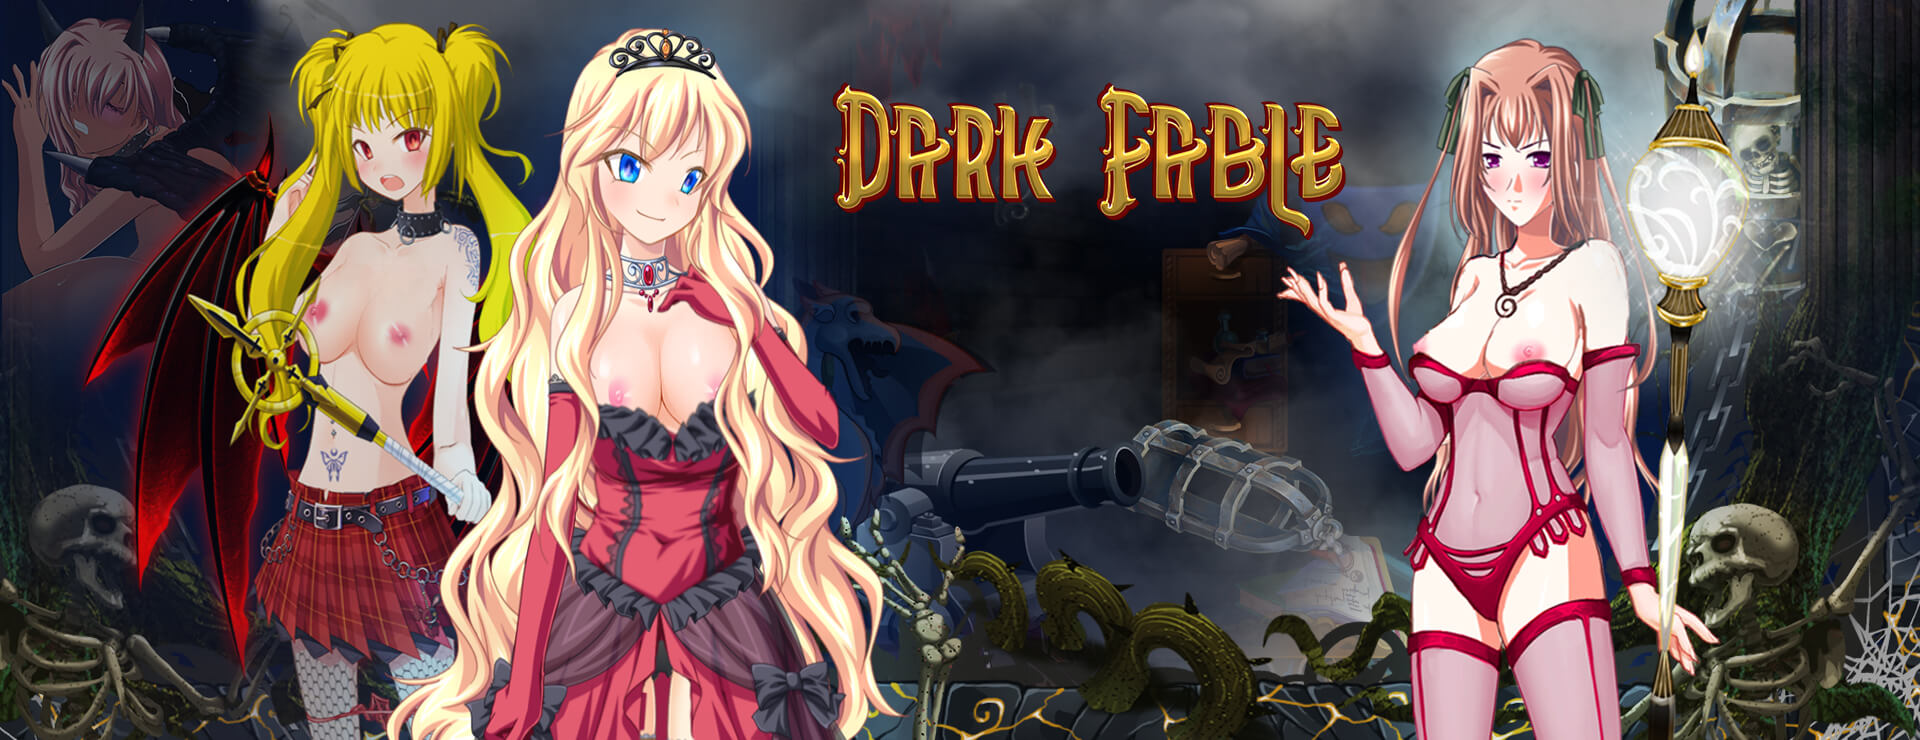 Dark Fable - Action Adventure Game